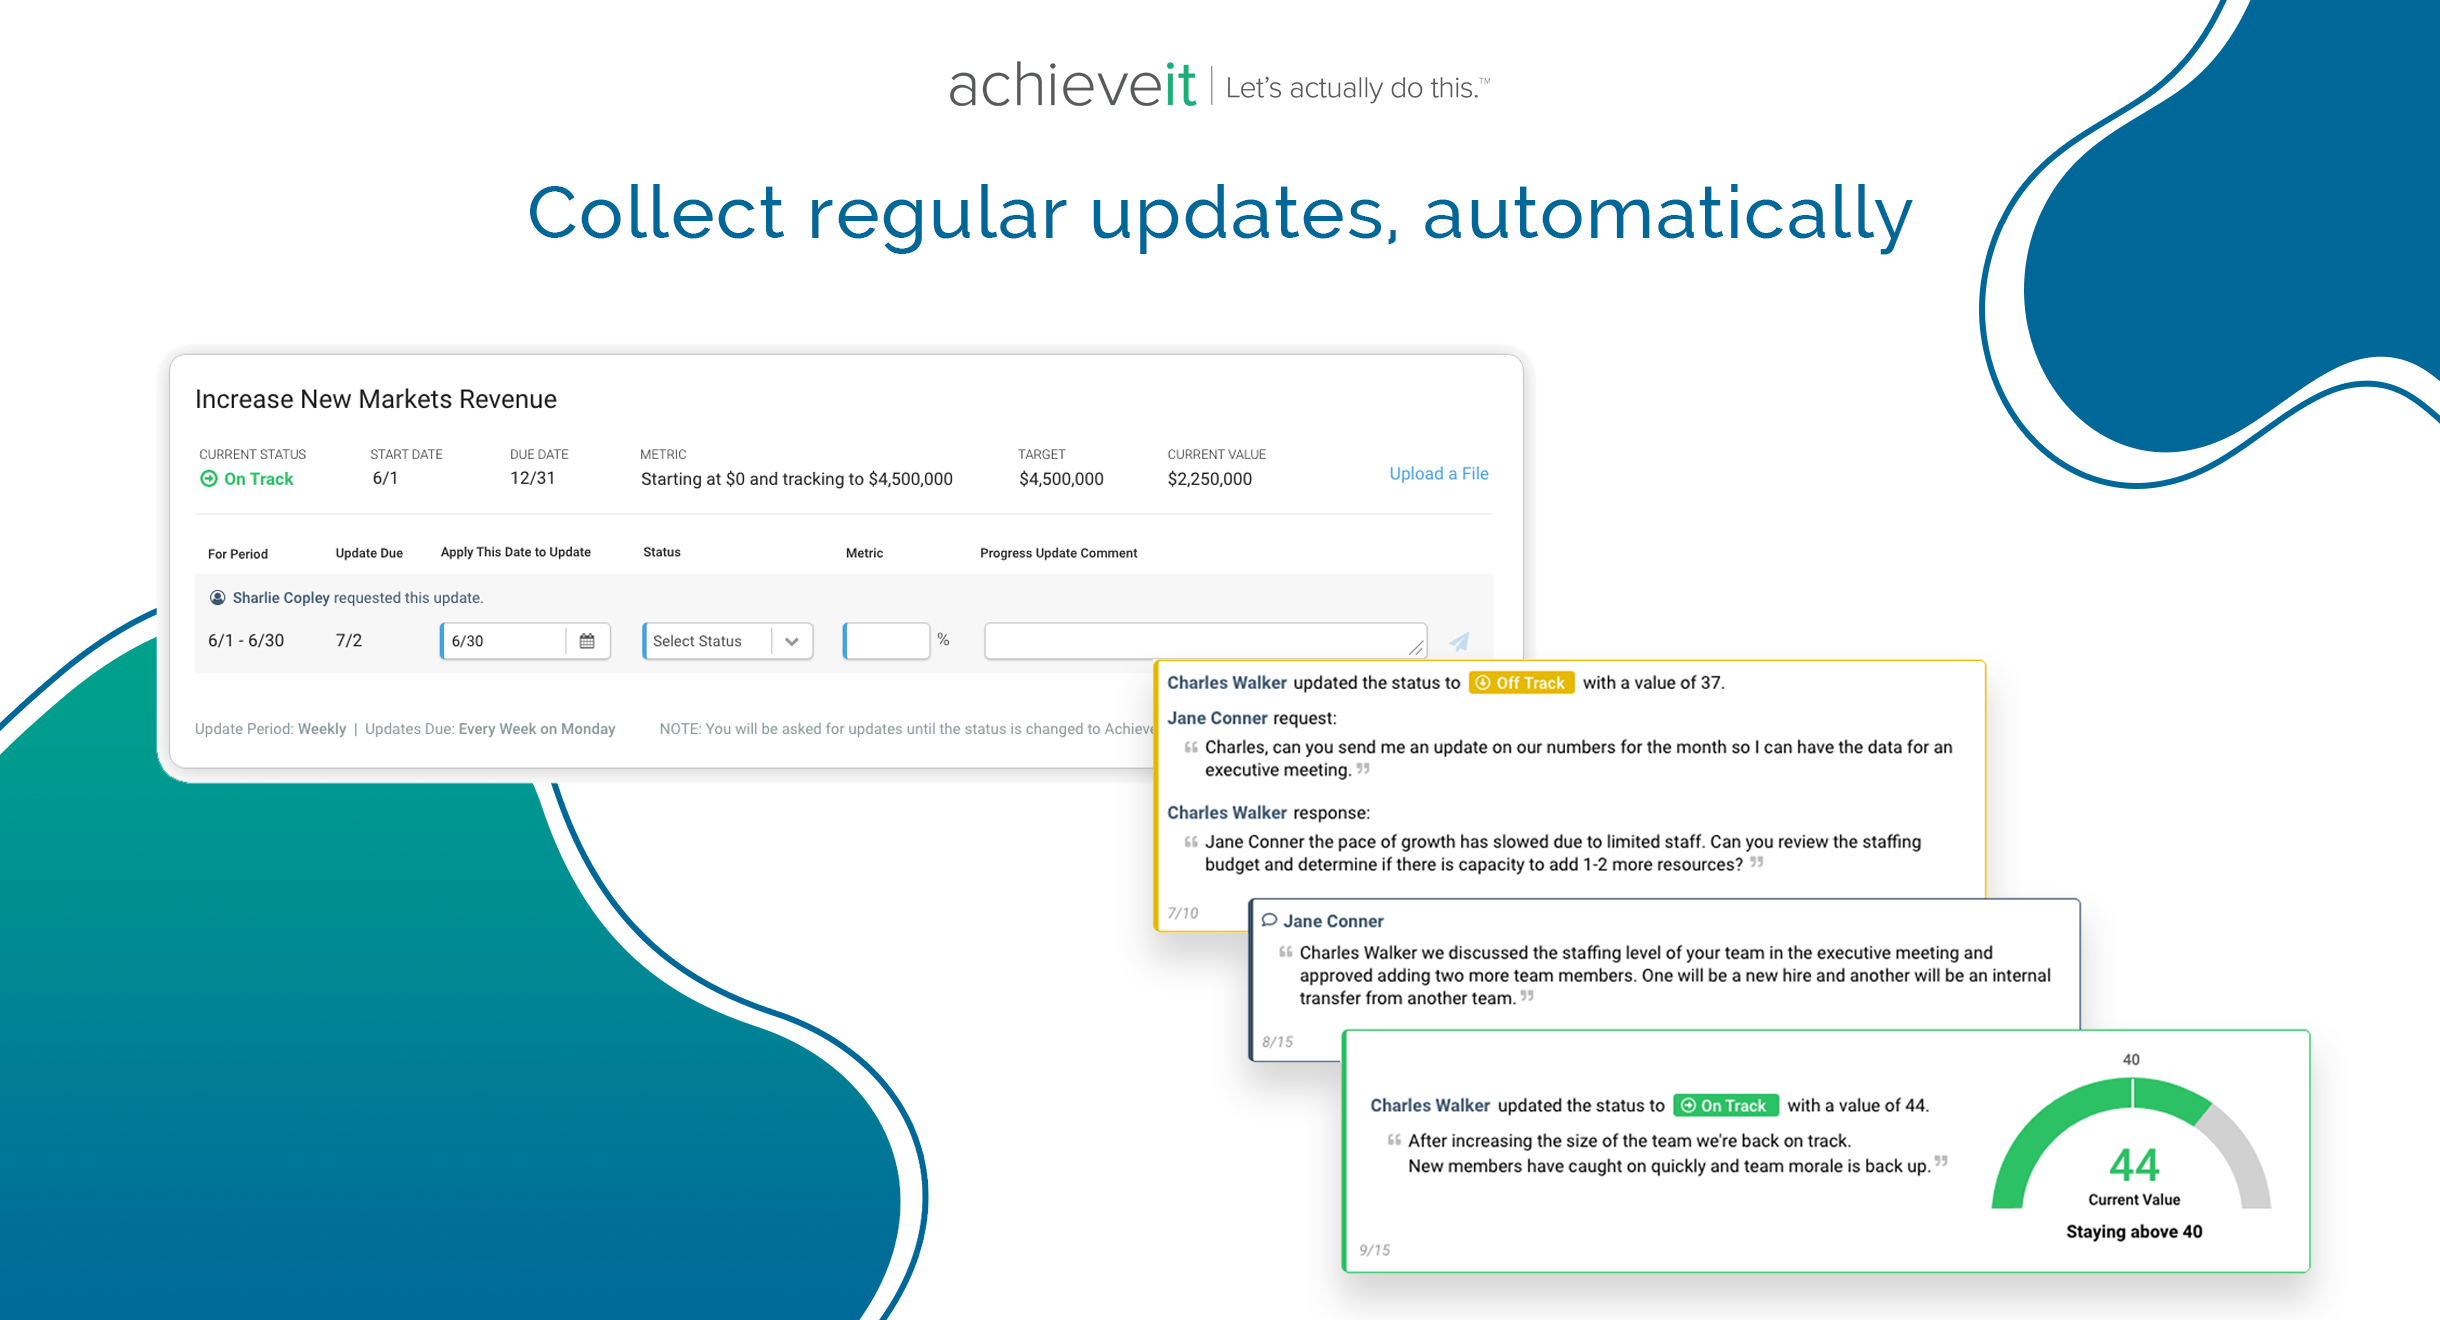 No more multi-tabbed, thousand row spreadsheets. Easily filter plans for the information you need. And you’re always just a click away from all context & historical updates.